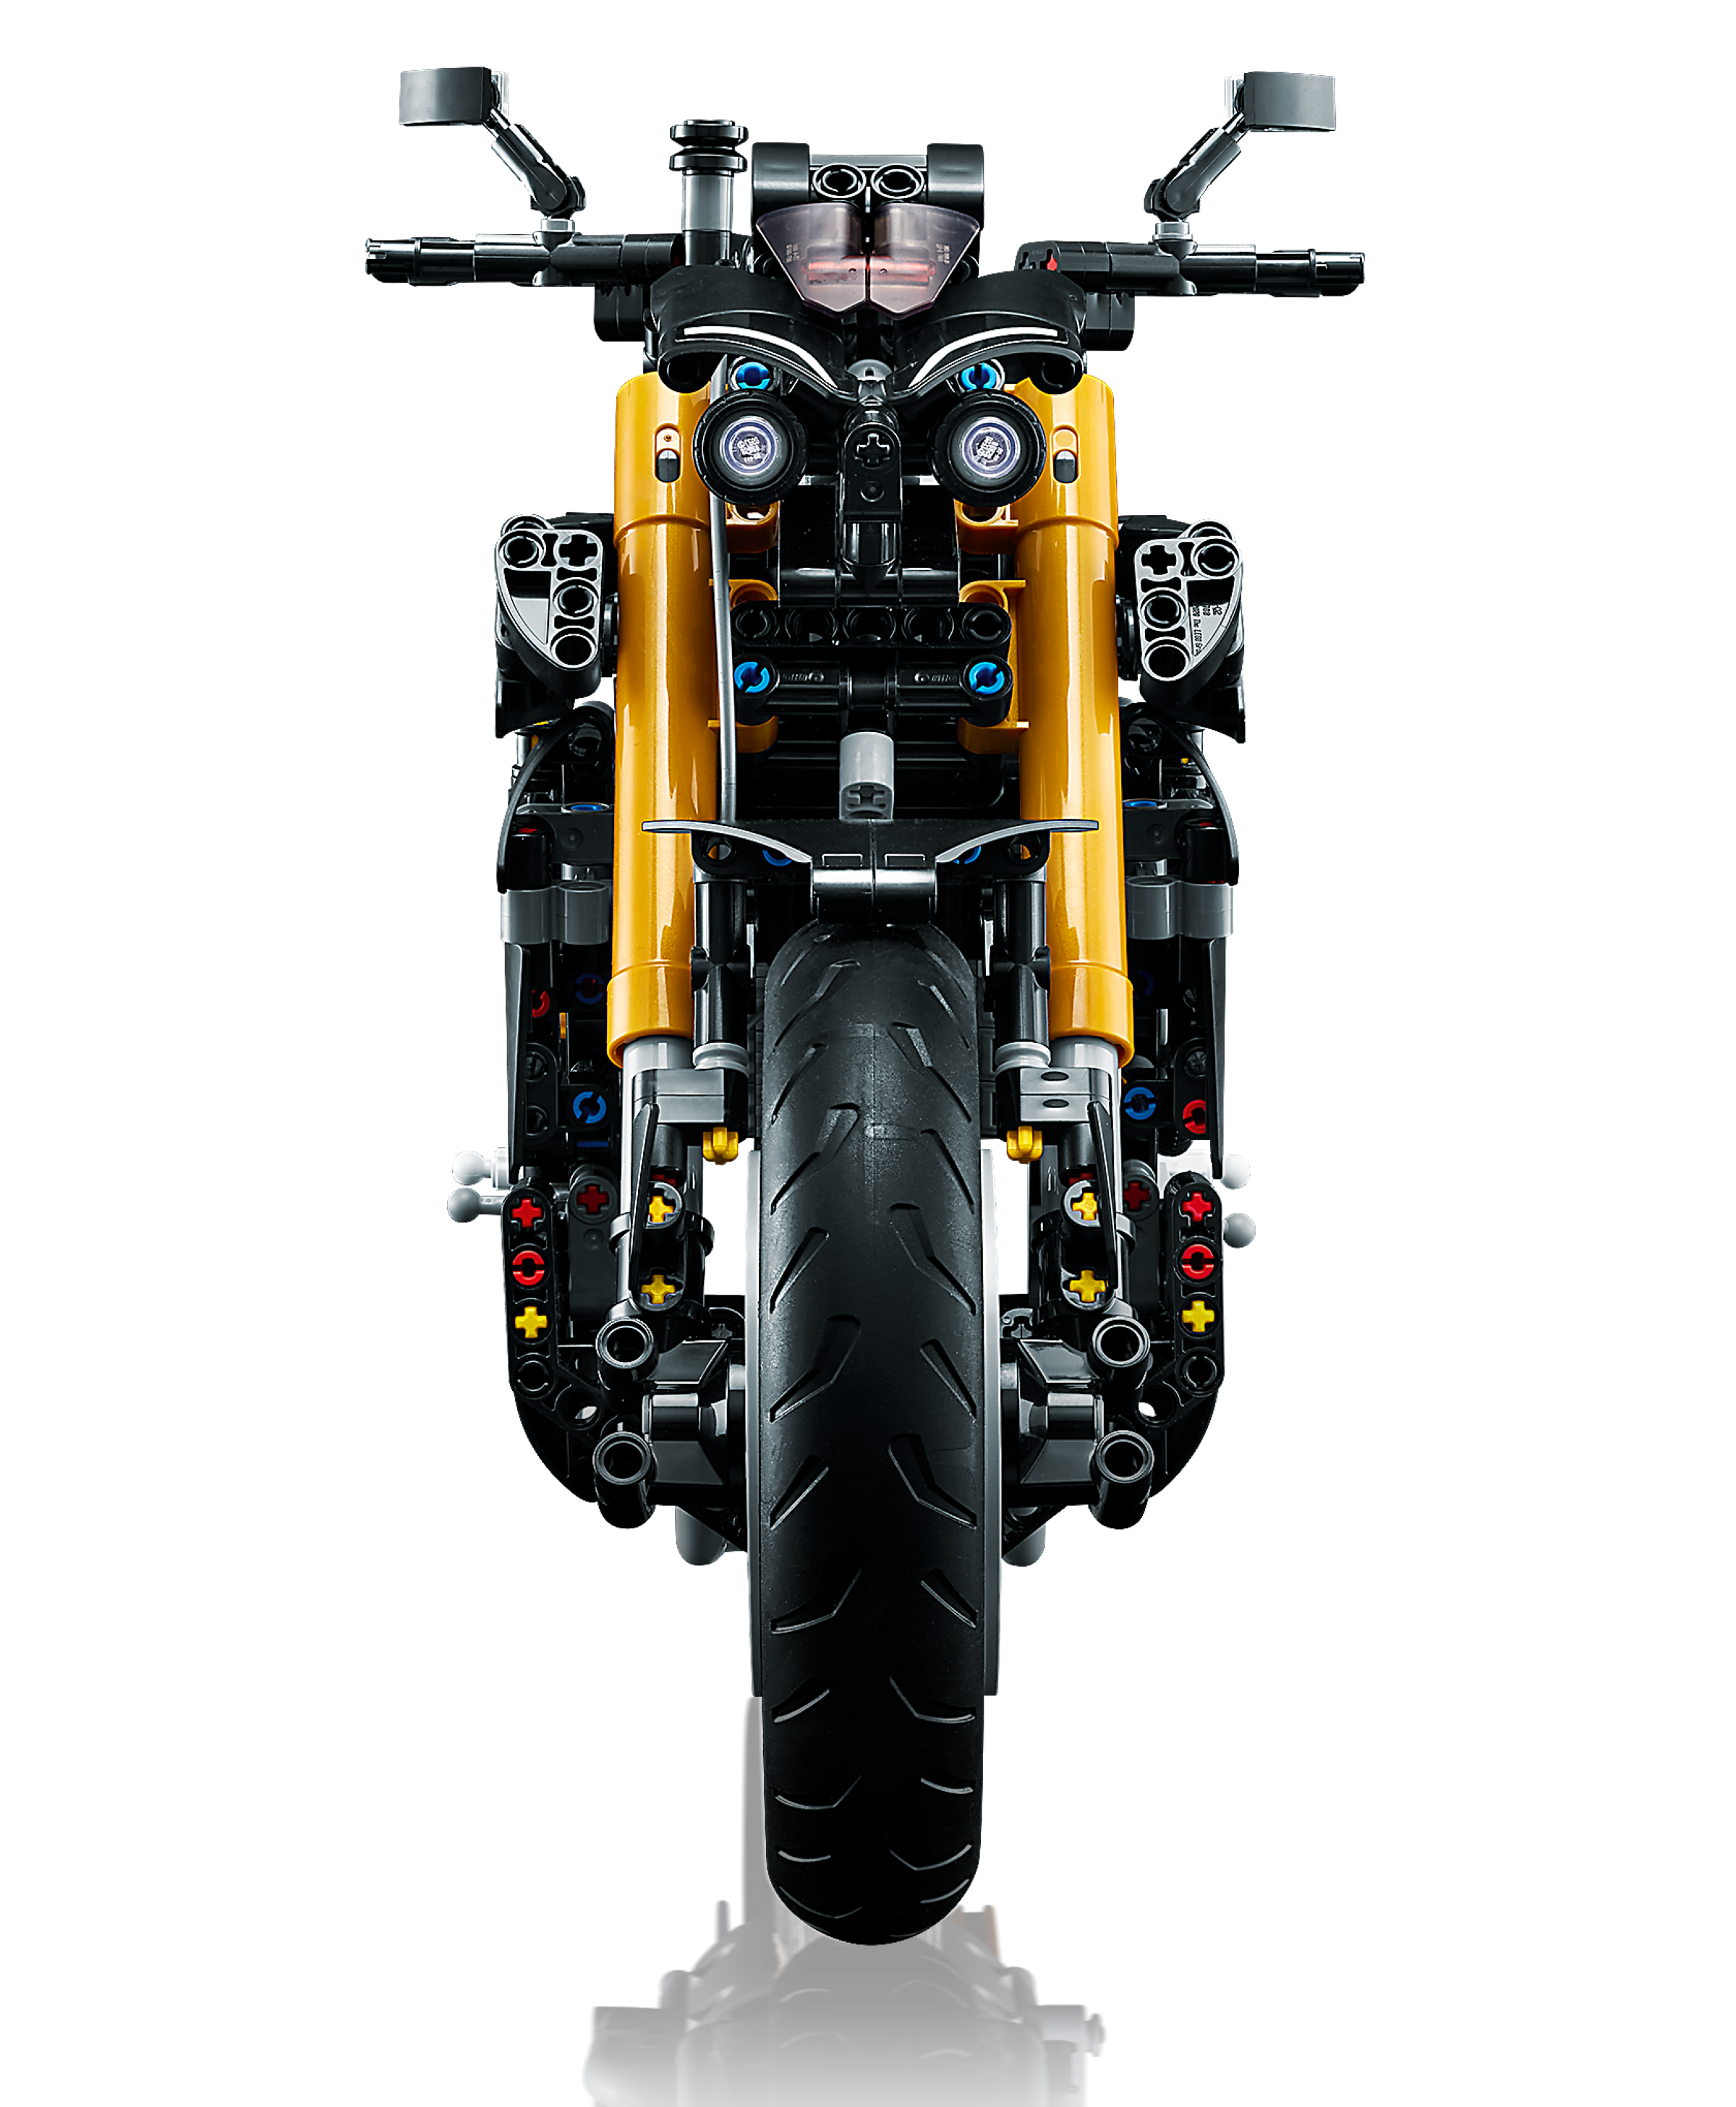 LEGO Technic Yamaha MT-10 SP 42159 Advanced Building Set for Adults, This  Iconic Motorcycle Model for Build and Display Makes a Great Gift for Fans  of